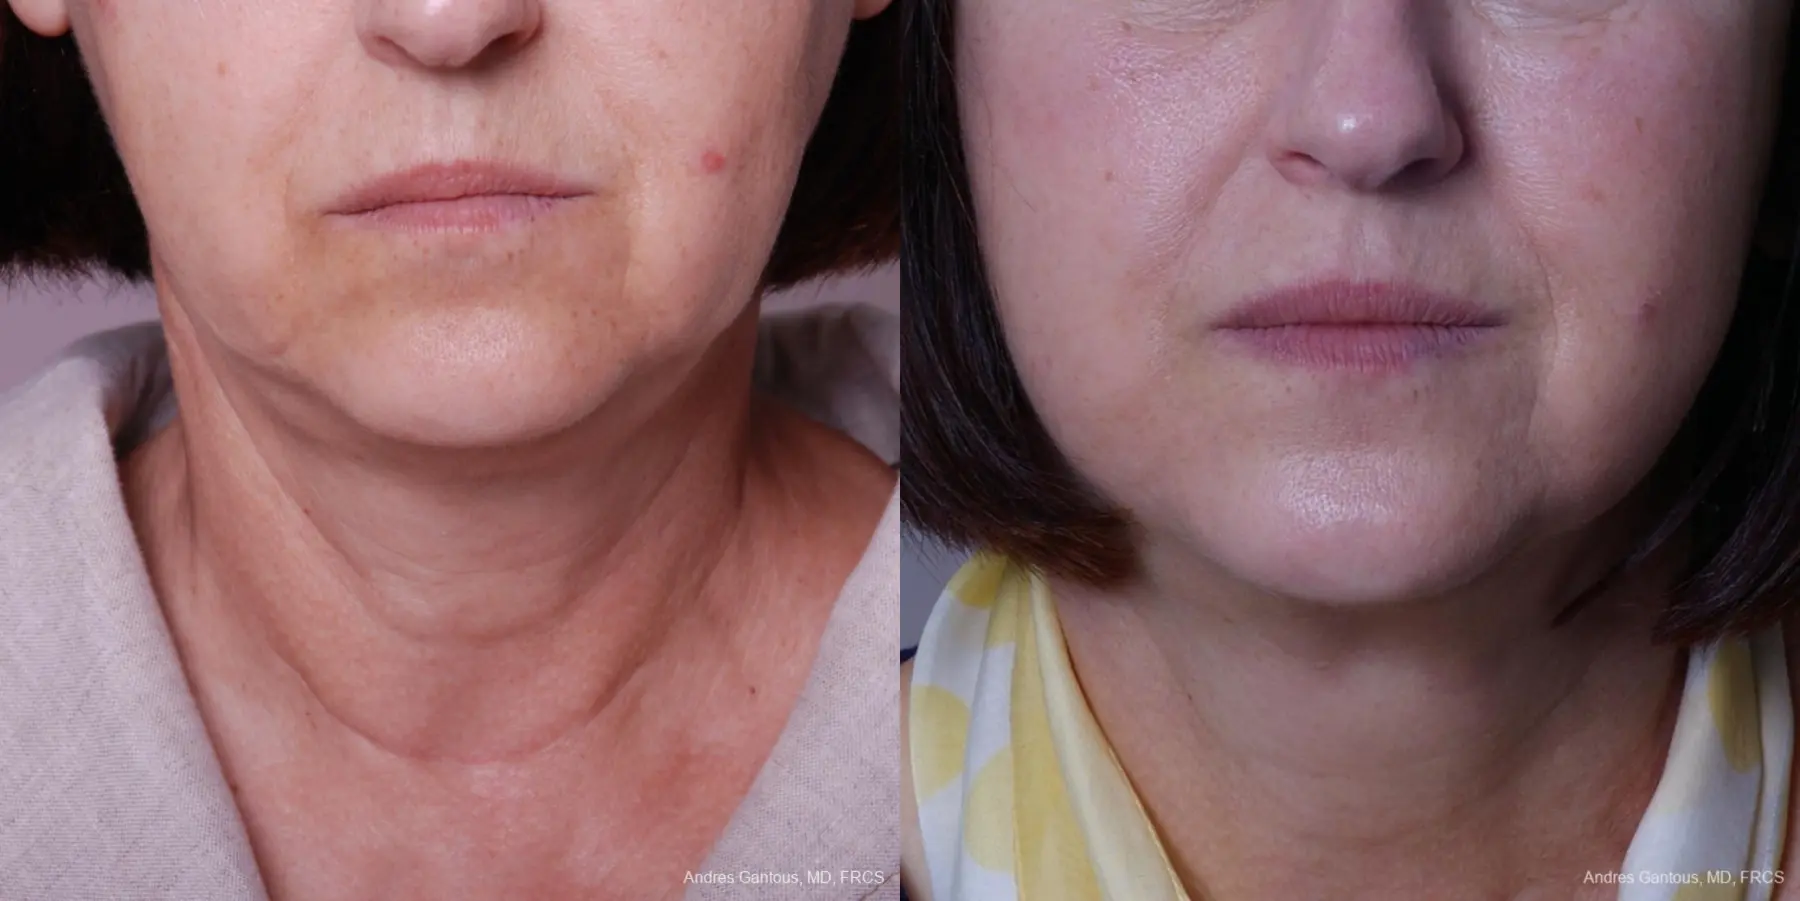 Facelift & Neck Lift: Patient 2 - Before and After 1